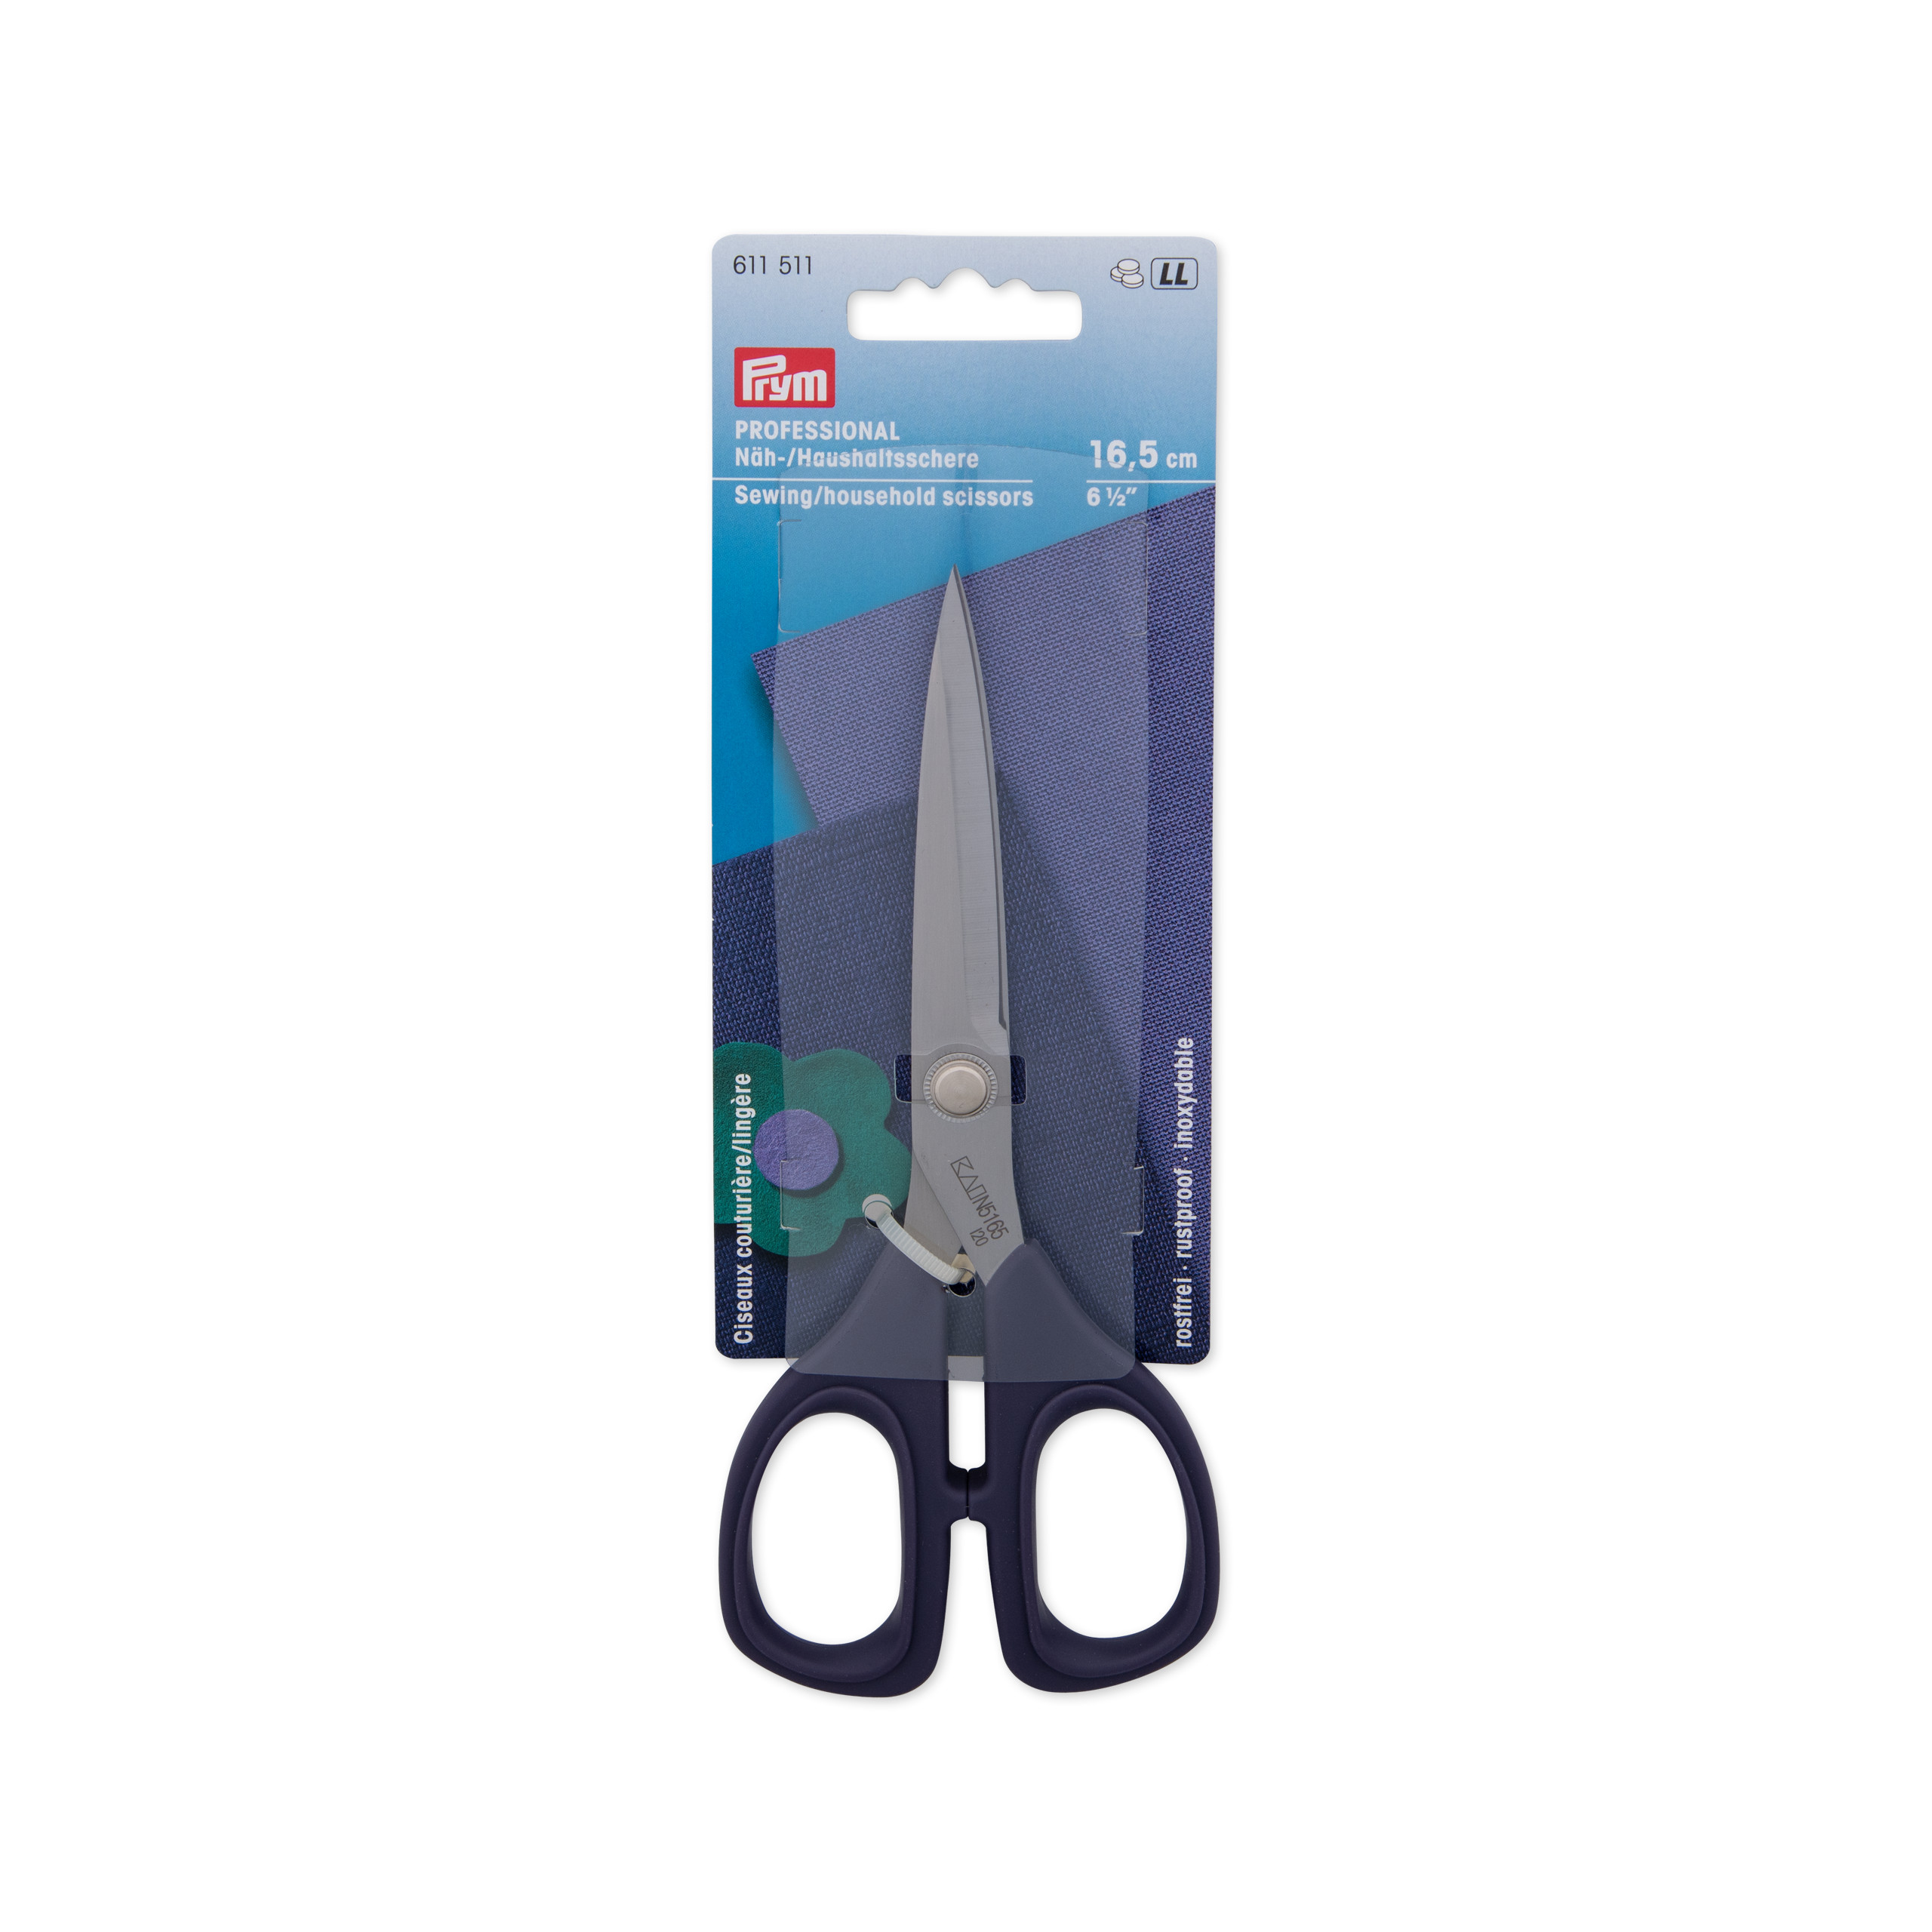 Professional Sewing and Household Scissors HT 6 1/2'' 16.5 cm, 1 St